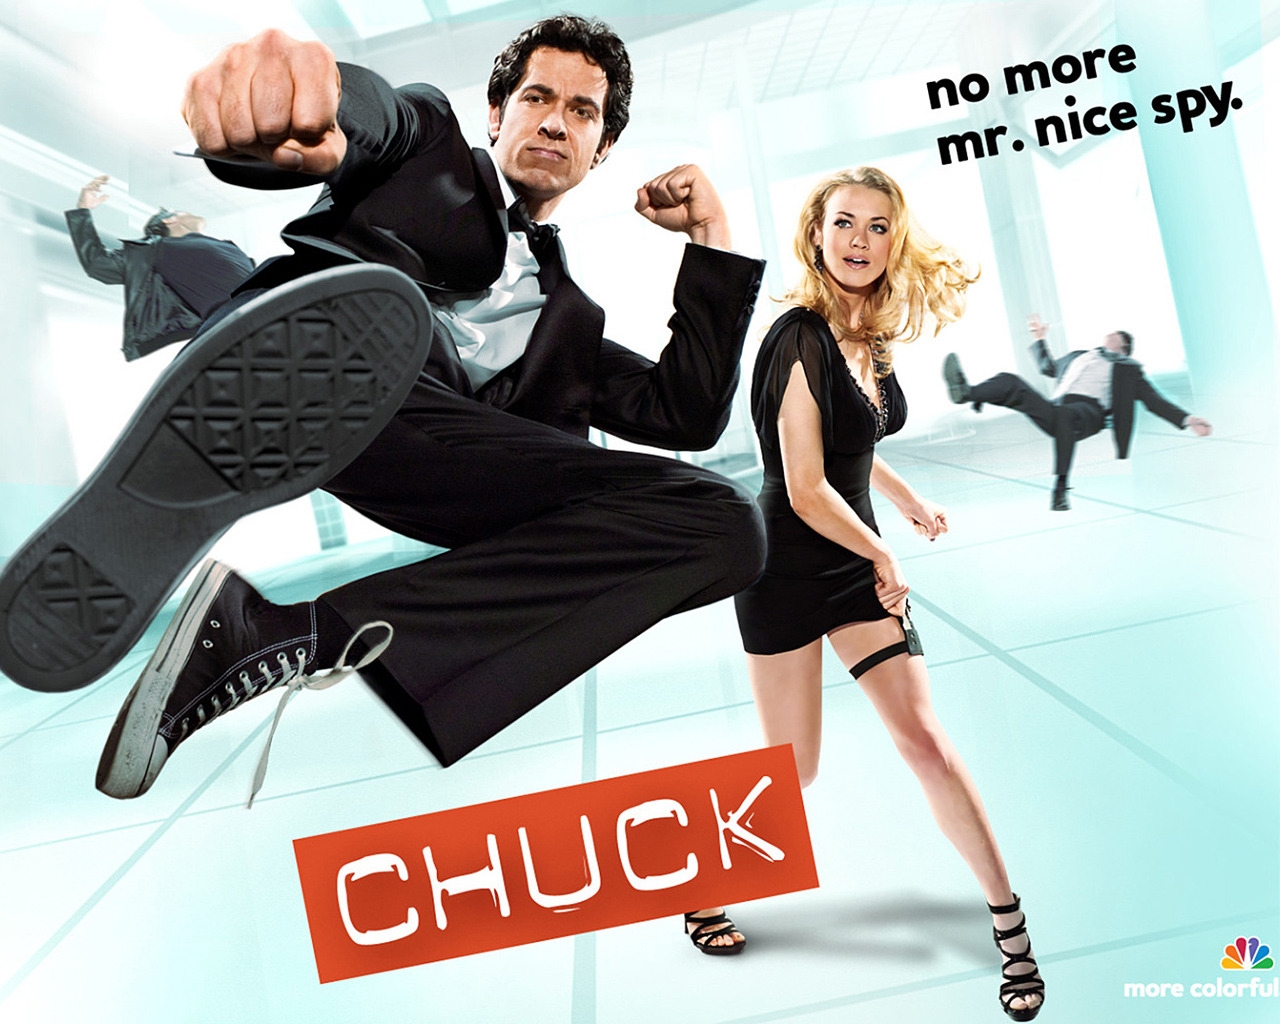 Kung Fu Chuck for 1280 x 1024 resolution